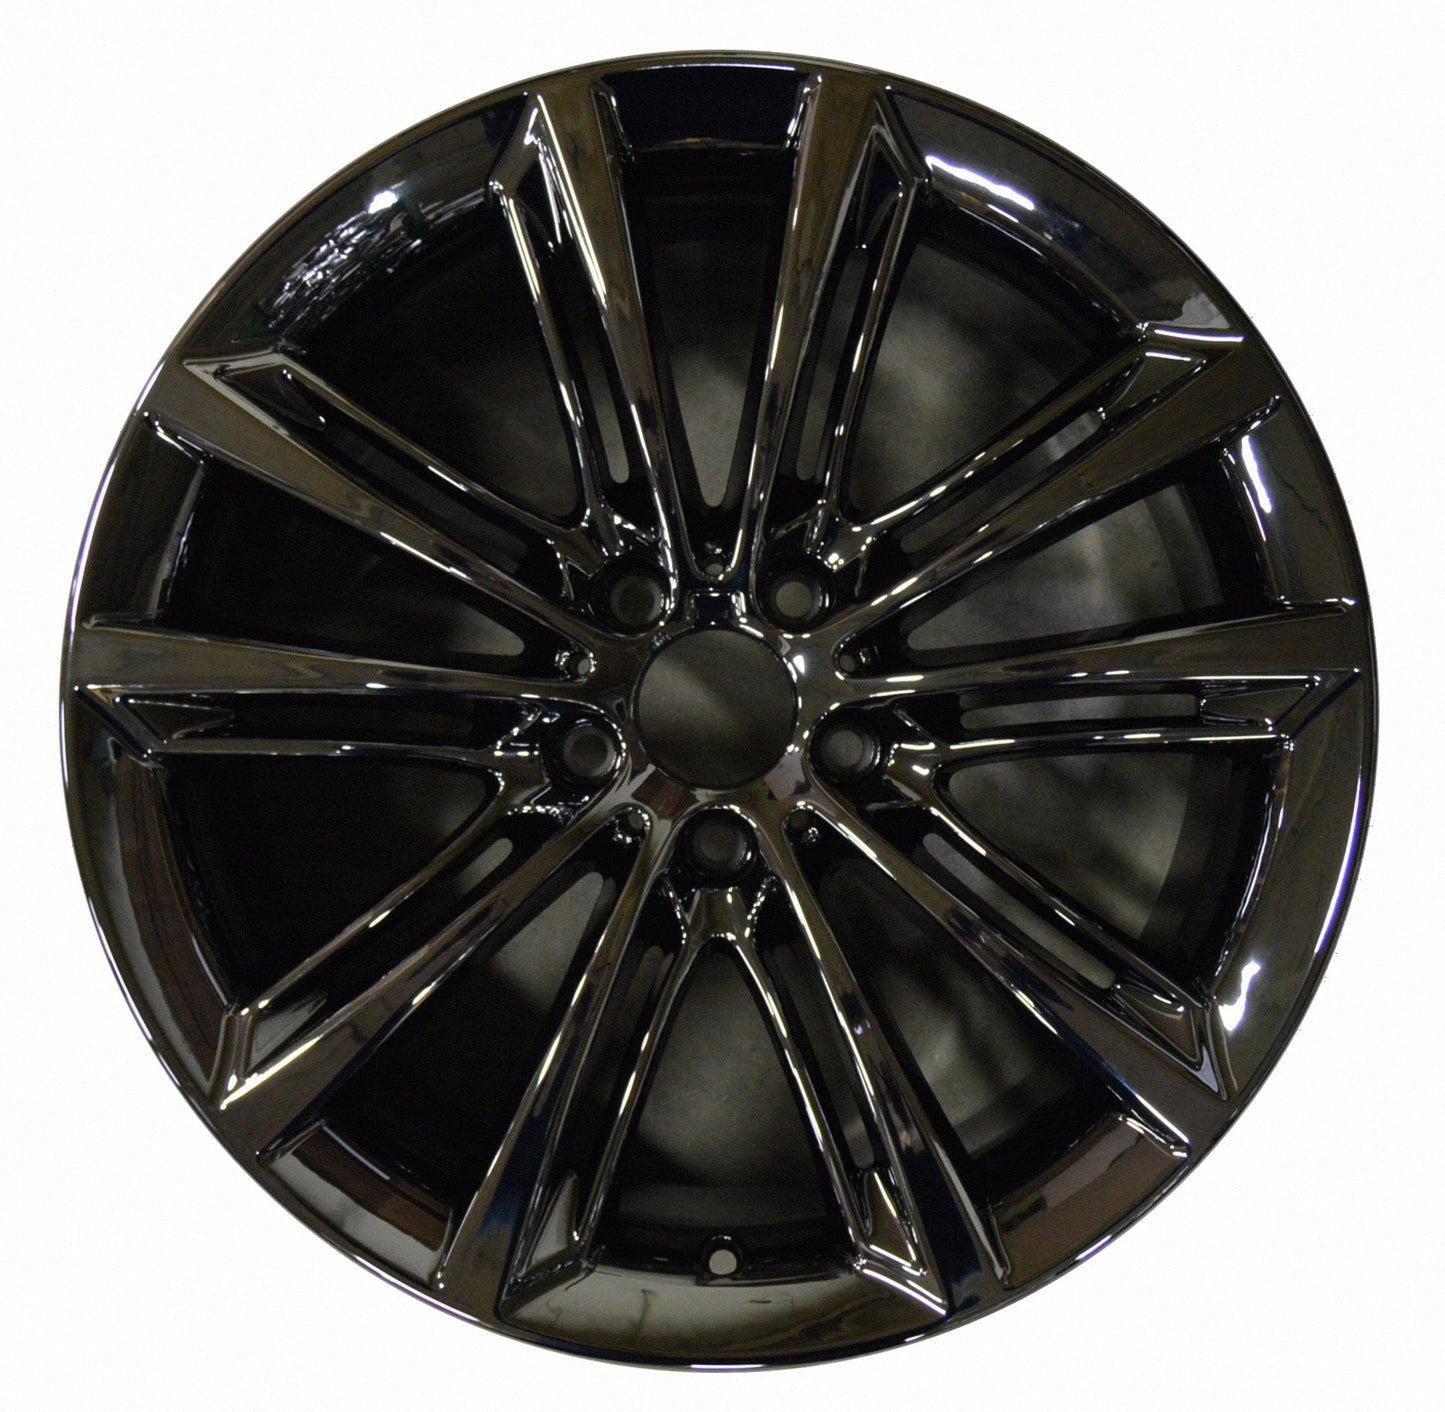 BMW 528i  2011, 2012, 2013, 2014, 2015, 2016 Factory OEM Car Wheel Size 20x8.5 Alloy WAO.71584FT.PVD2.FF